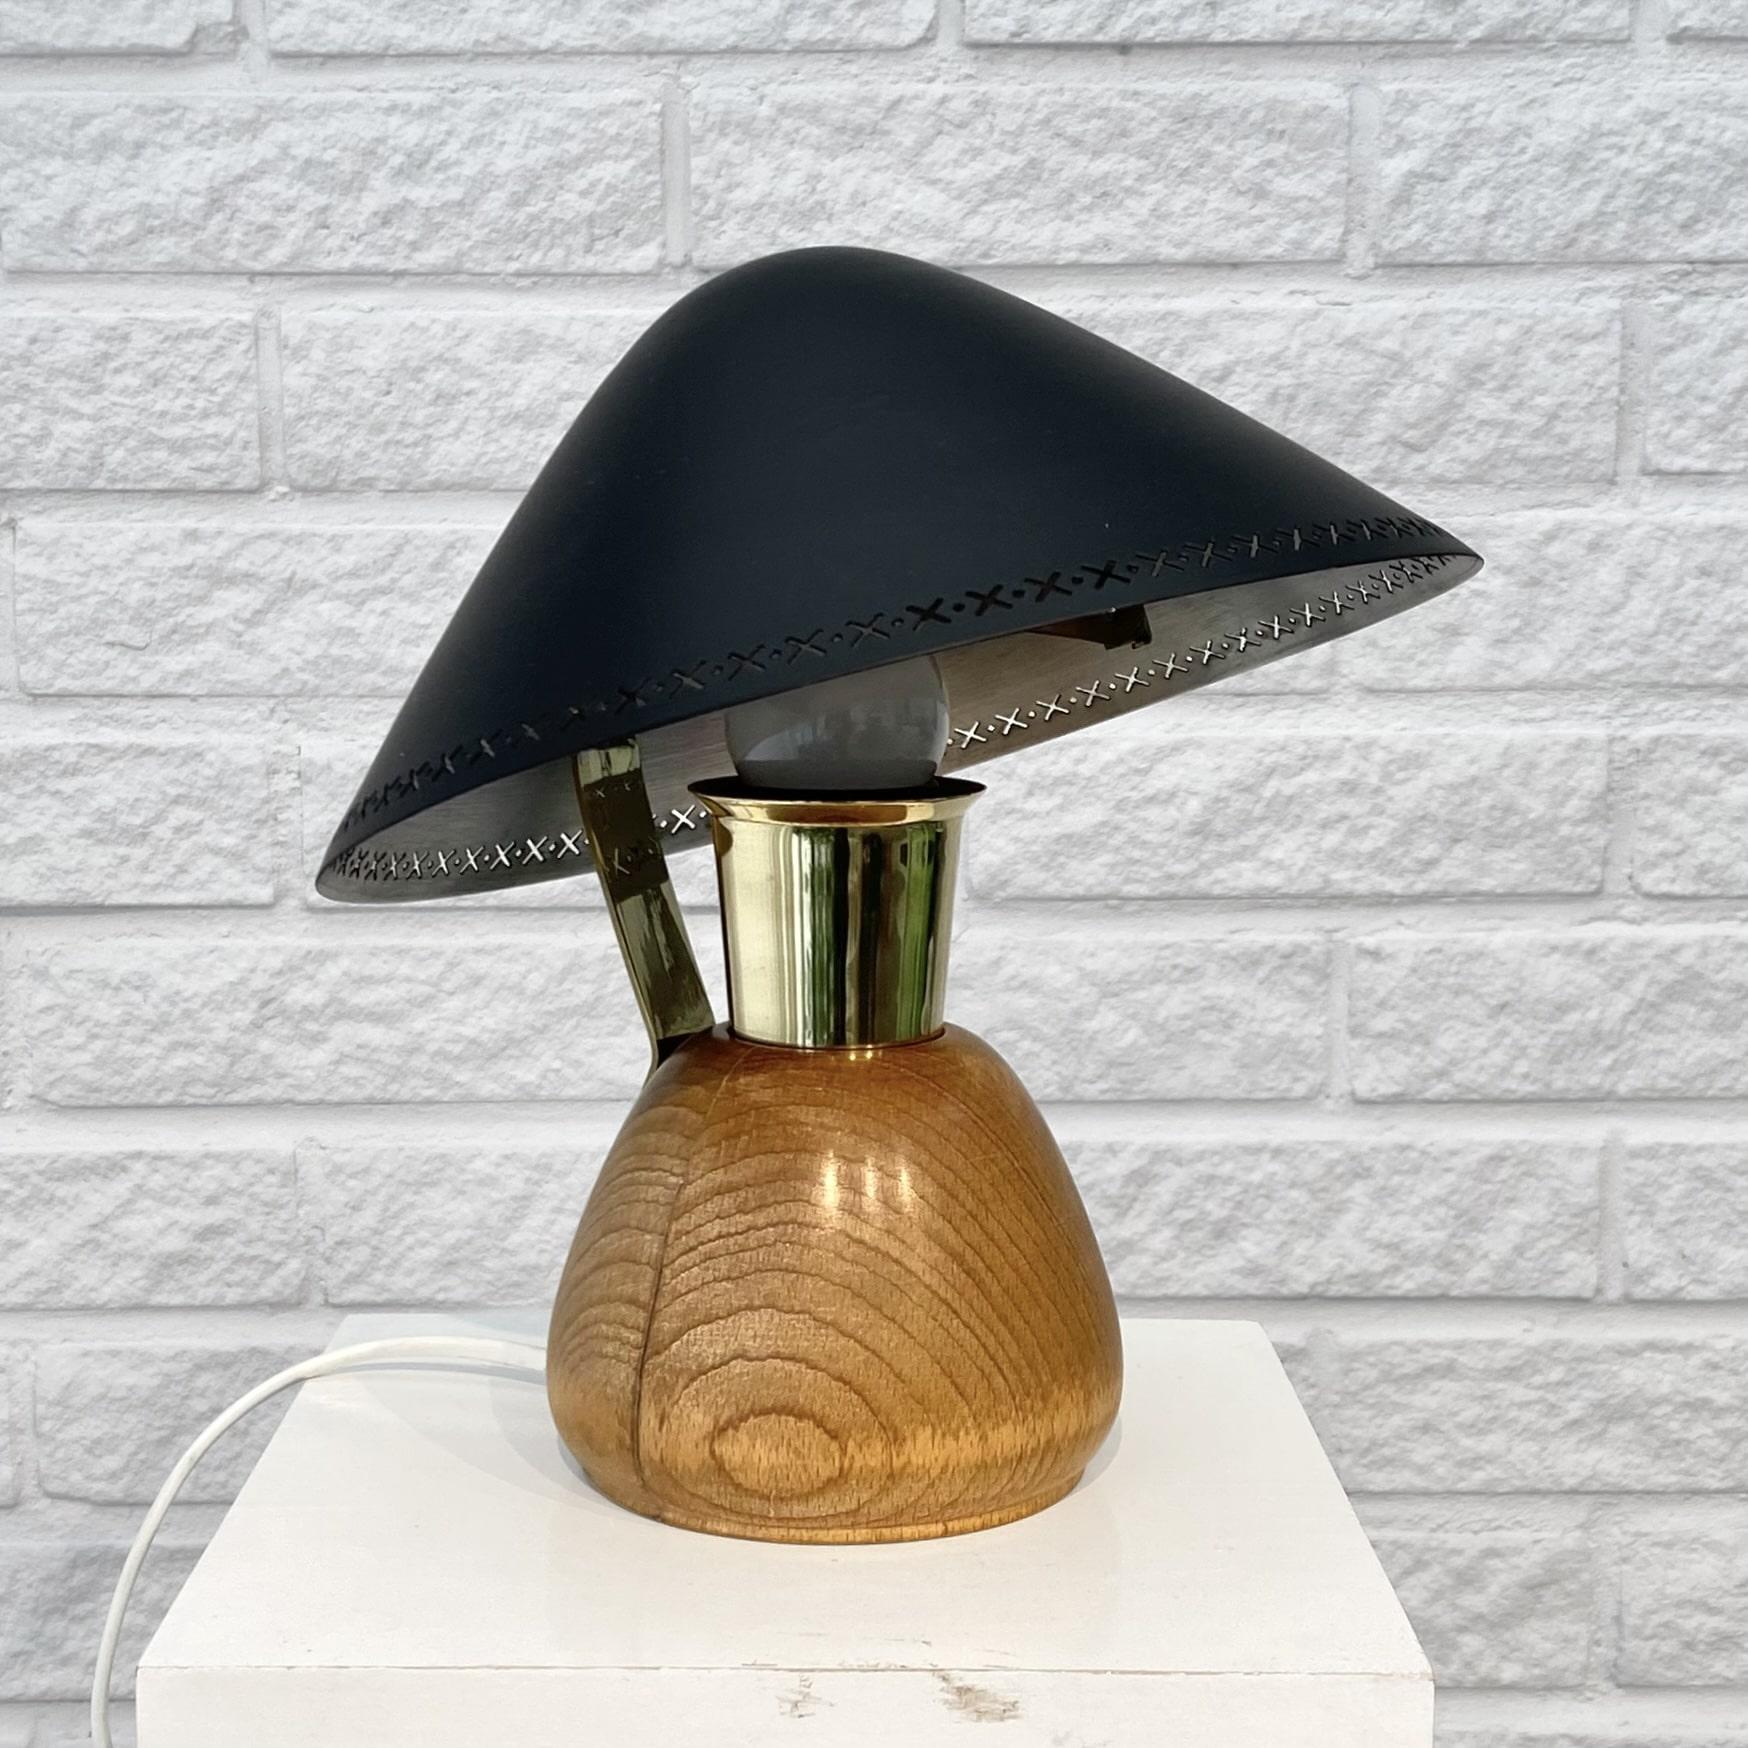 Rare ASEA table lamp, model E1272, dating back to the 1950s, featuring a rounded base crafted from solid wood. The disc shaped metal shade is adjustable and held just place by a brass arm.

ASEA, the Swedish electrical company, was established as